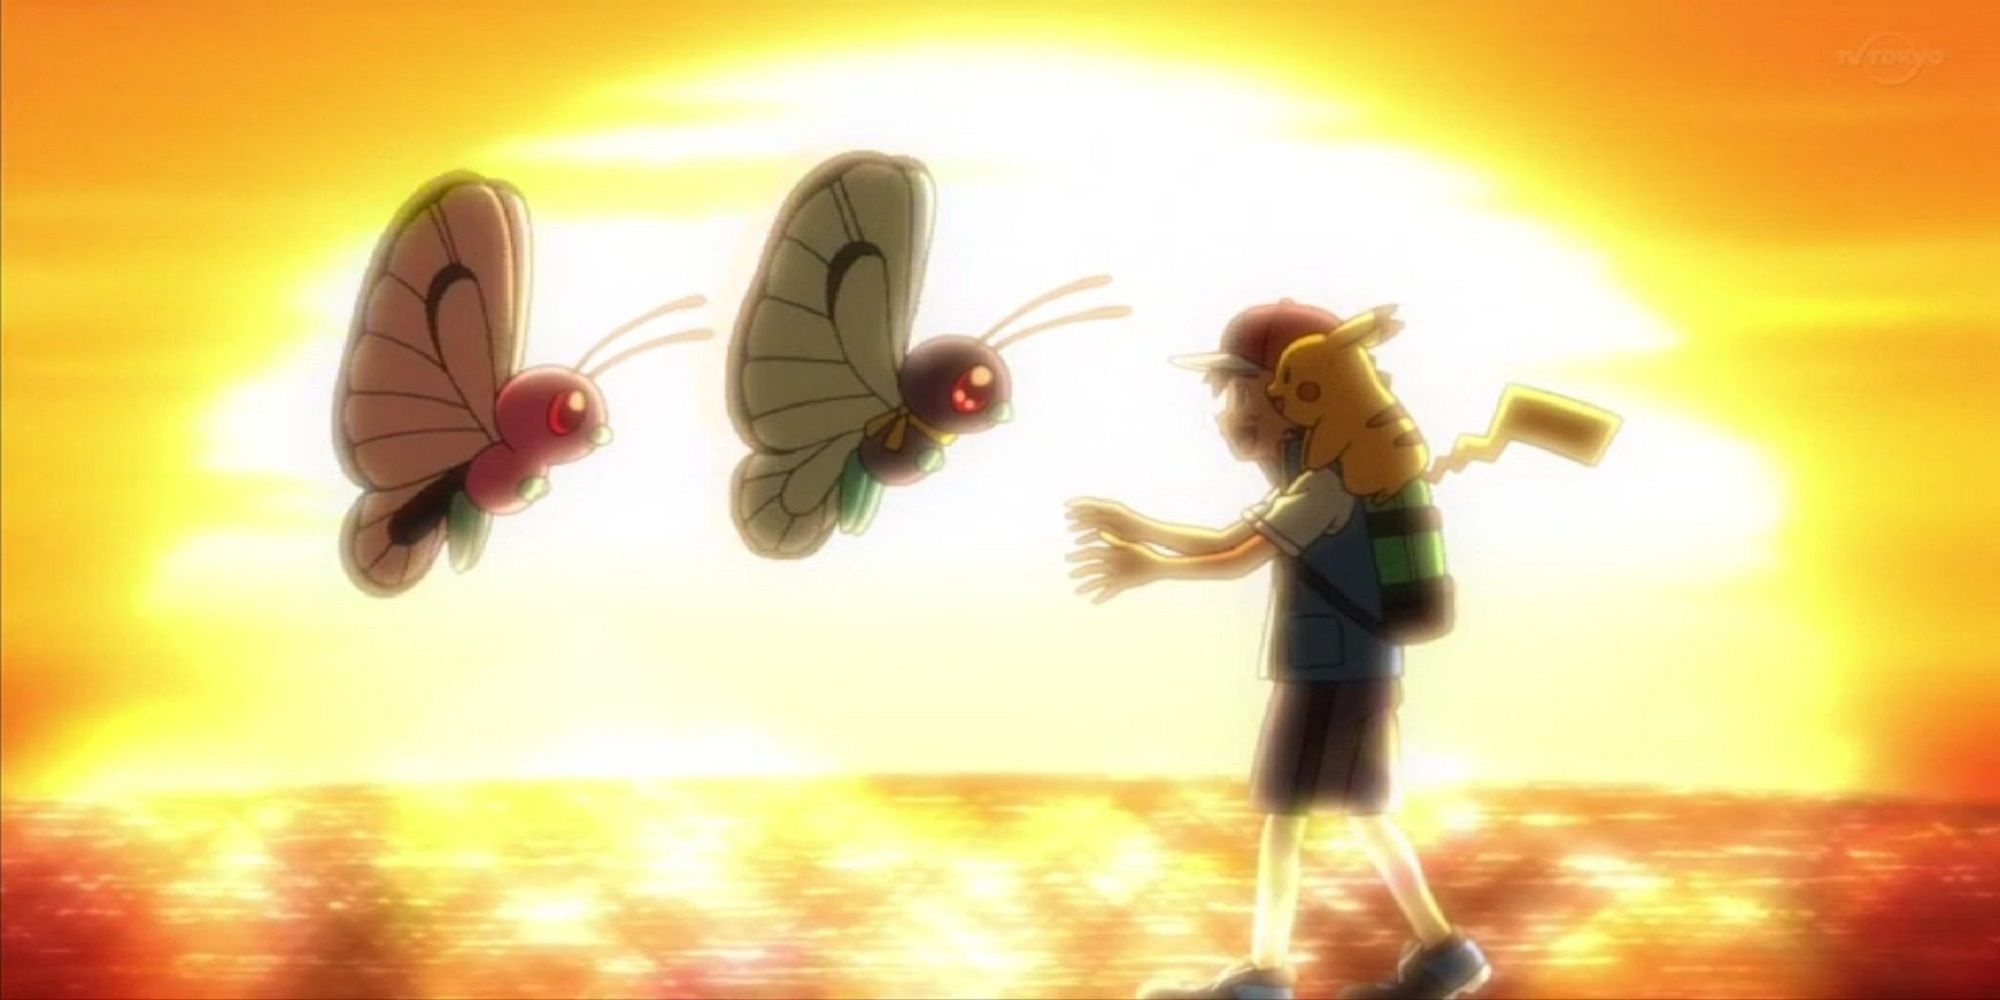 Ash meets Butterfree